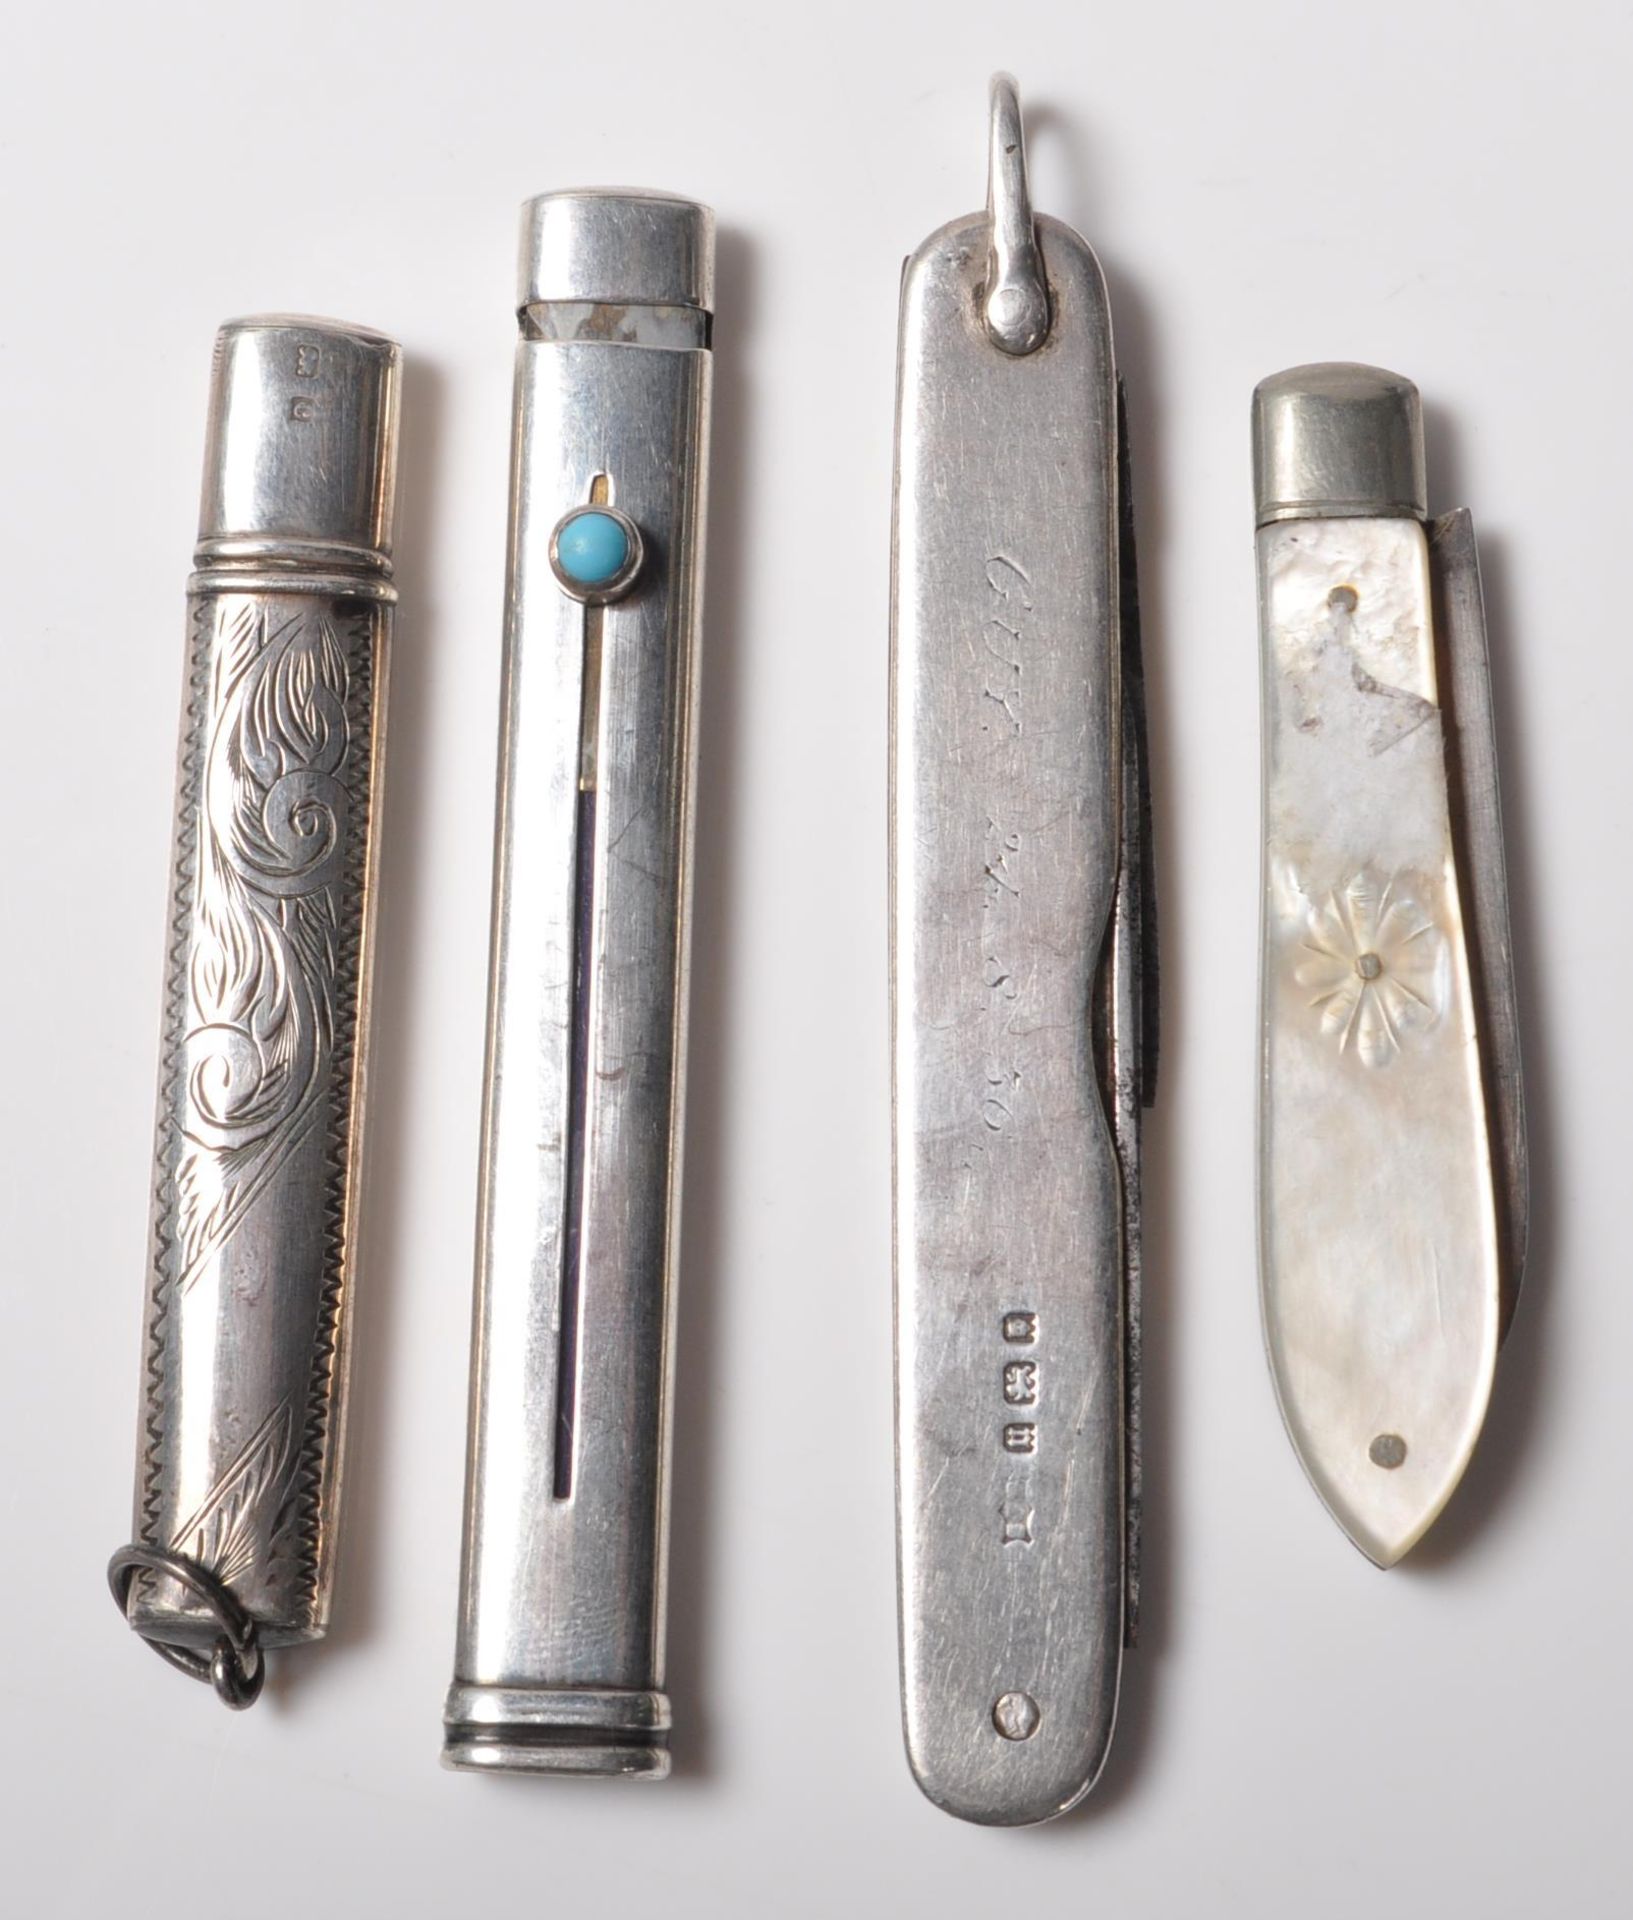 TWO HALLMARKED STERLING SILVER PENKNIVES AND TWO HALLMARKED STERLING SILVER PENCILS.